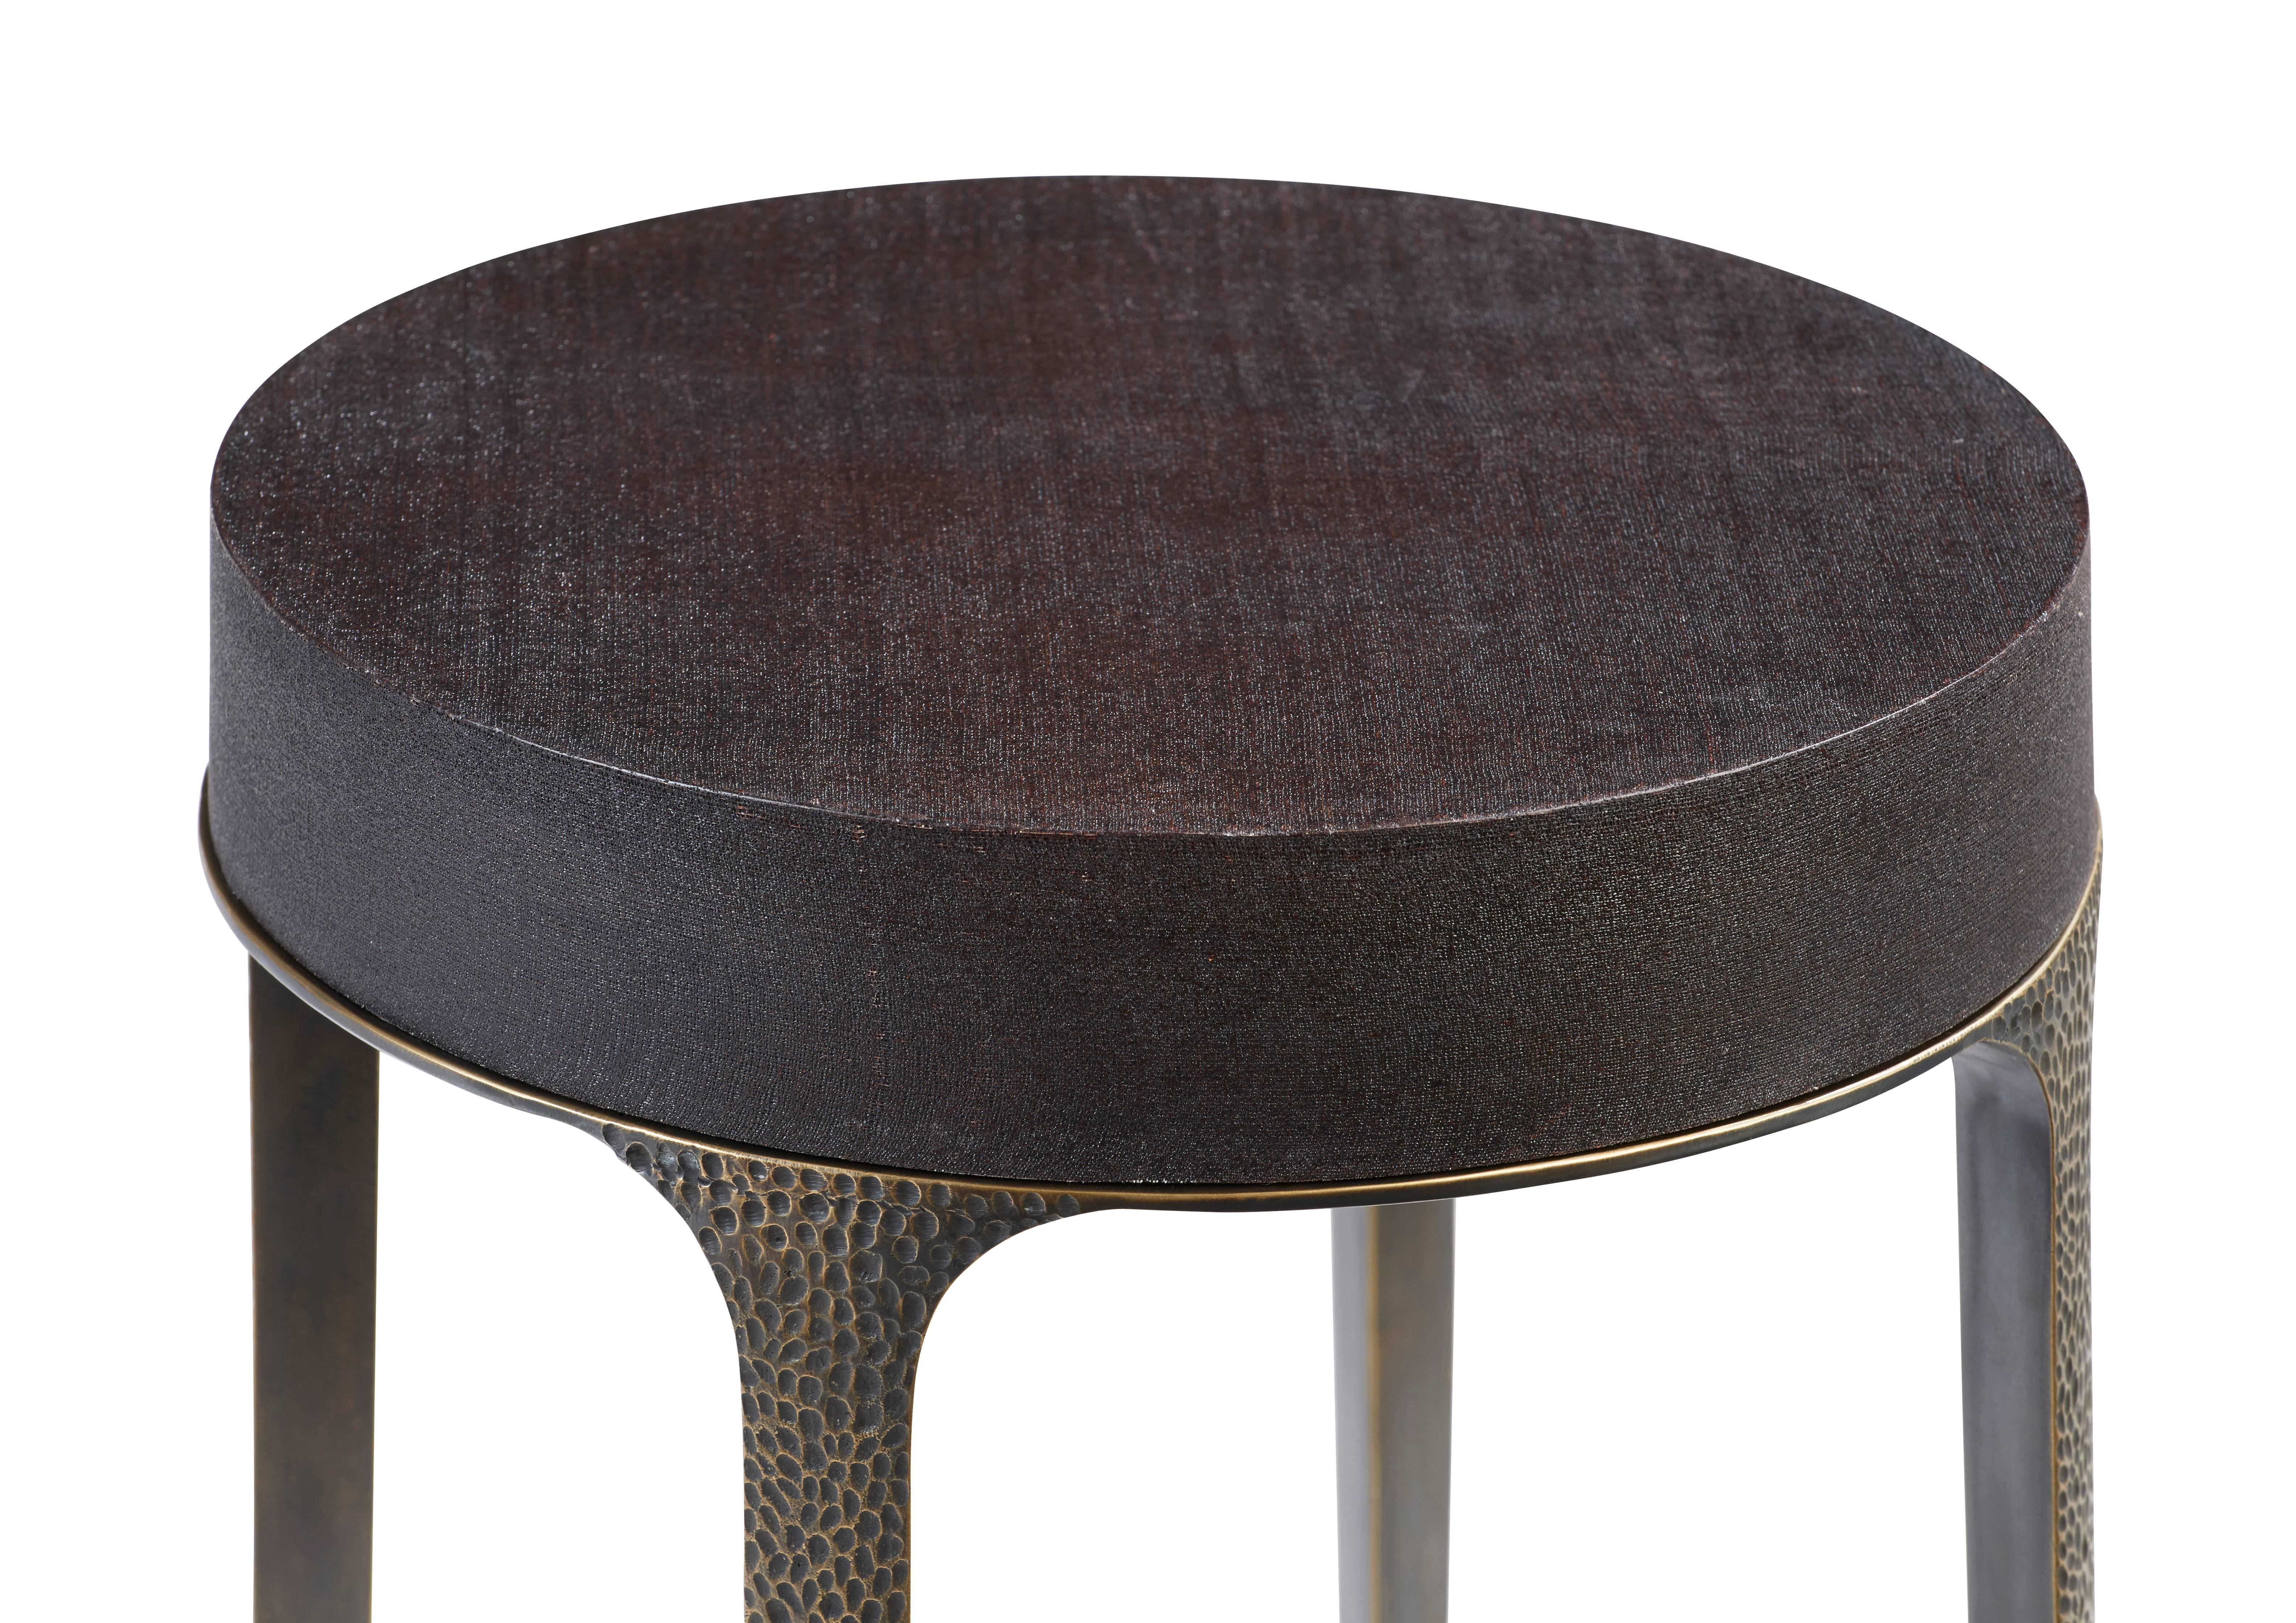 Minimalist Side Table, LADY BUG by Reda Amalou Design, 2017, Legs in Hammered bronze  For Sale